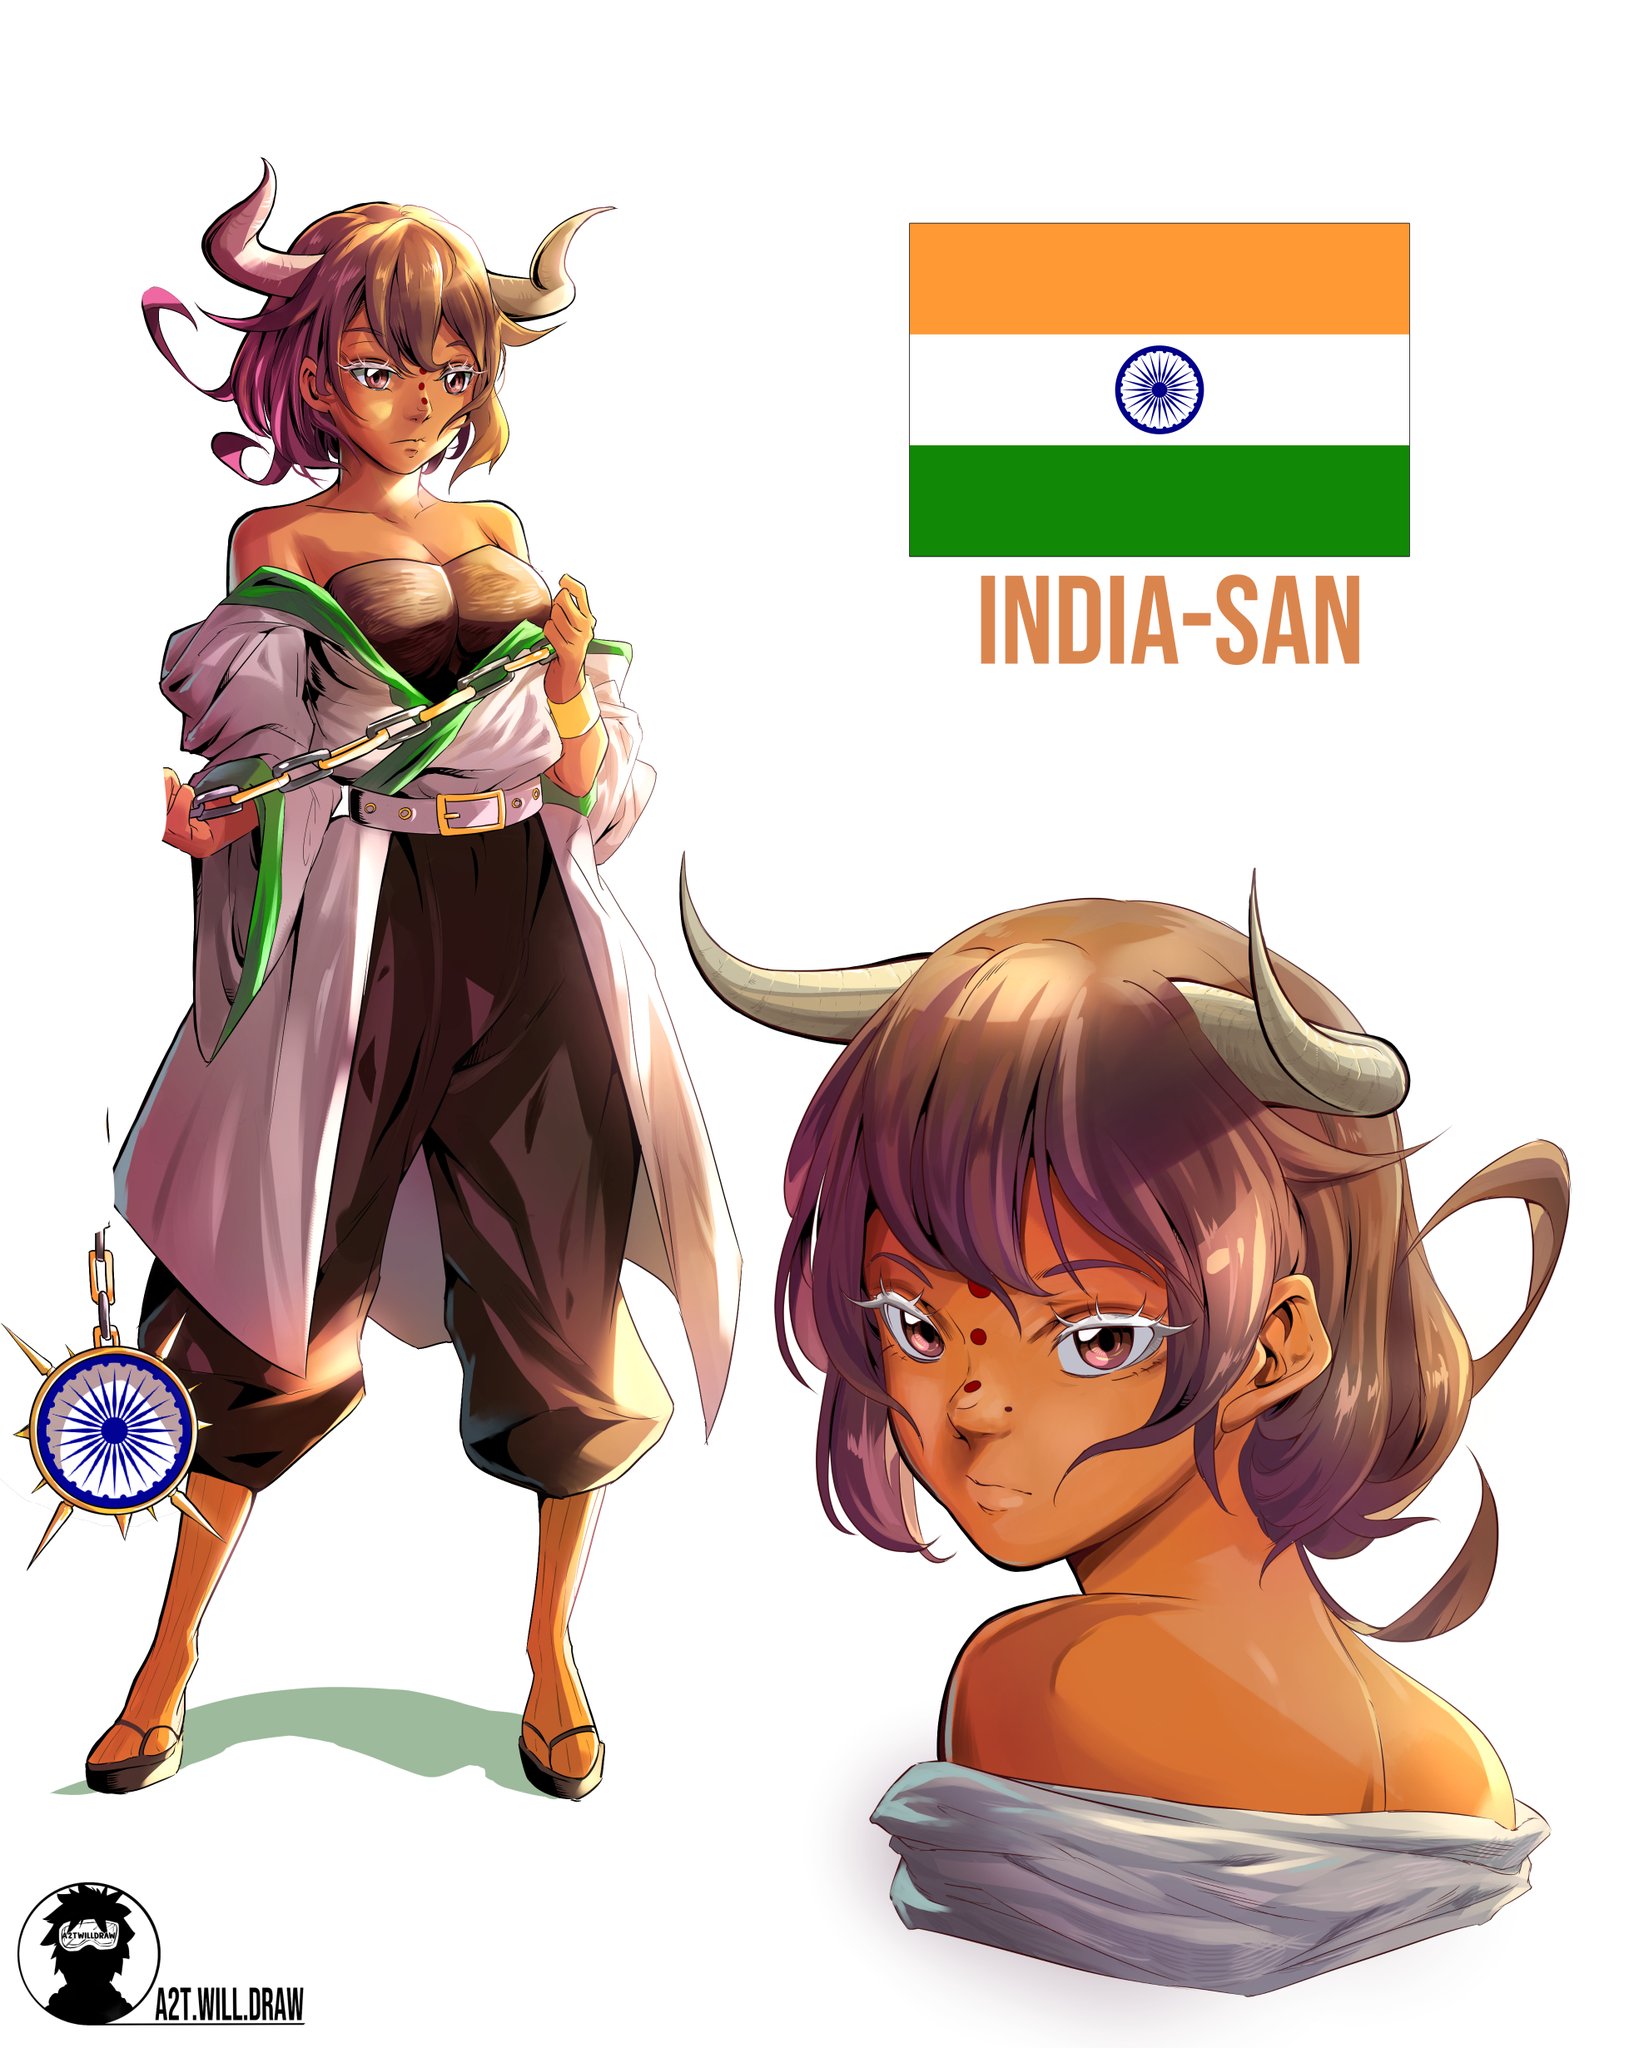 Anime Characters to pose with, in Comic Con India 2022-23